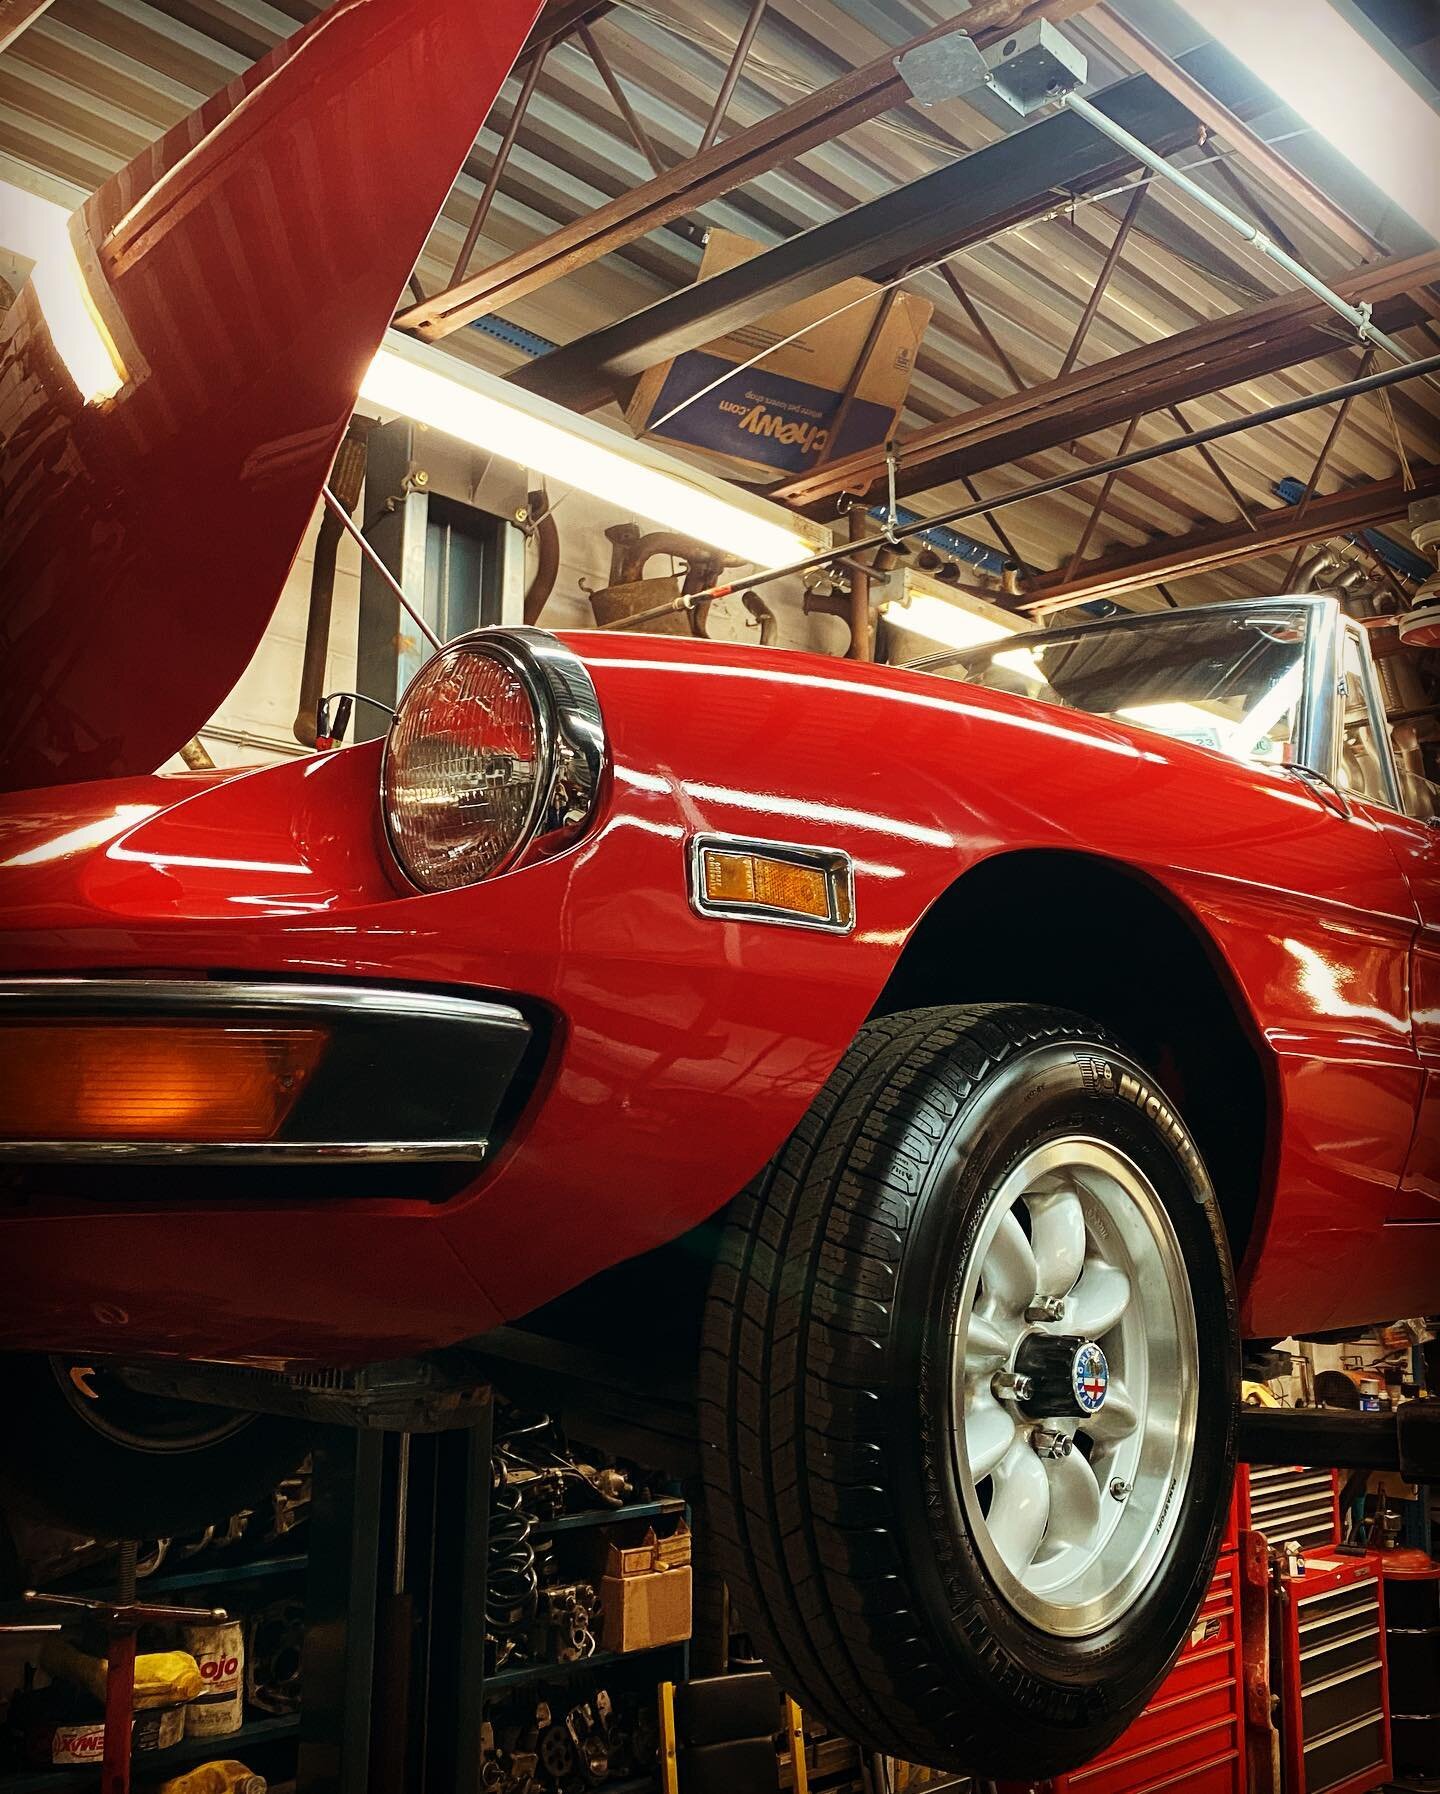 First week on the job, delving right into it. This S2 Spider is a very clean example, and now it runs even better. New clutch, cut flywheel, new blower motor. Ready for the cooler months. 

#alfa 
#aflaromeo 
#italiancar 
#alfalovers 
#aflfagta 
#alf